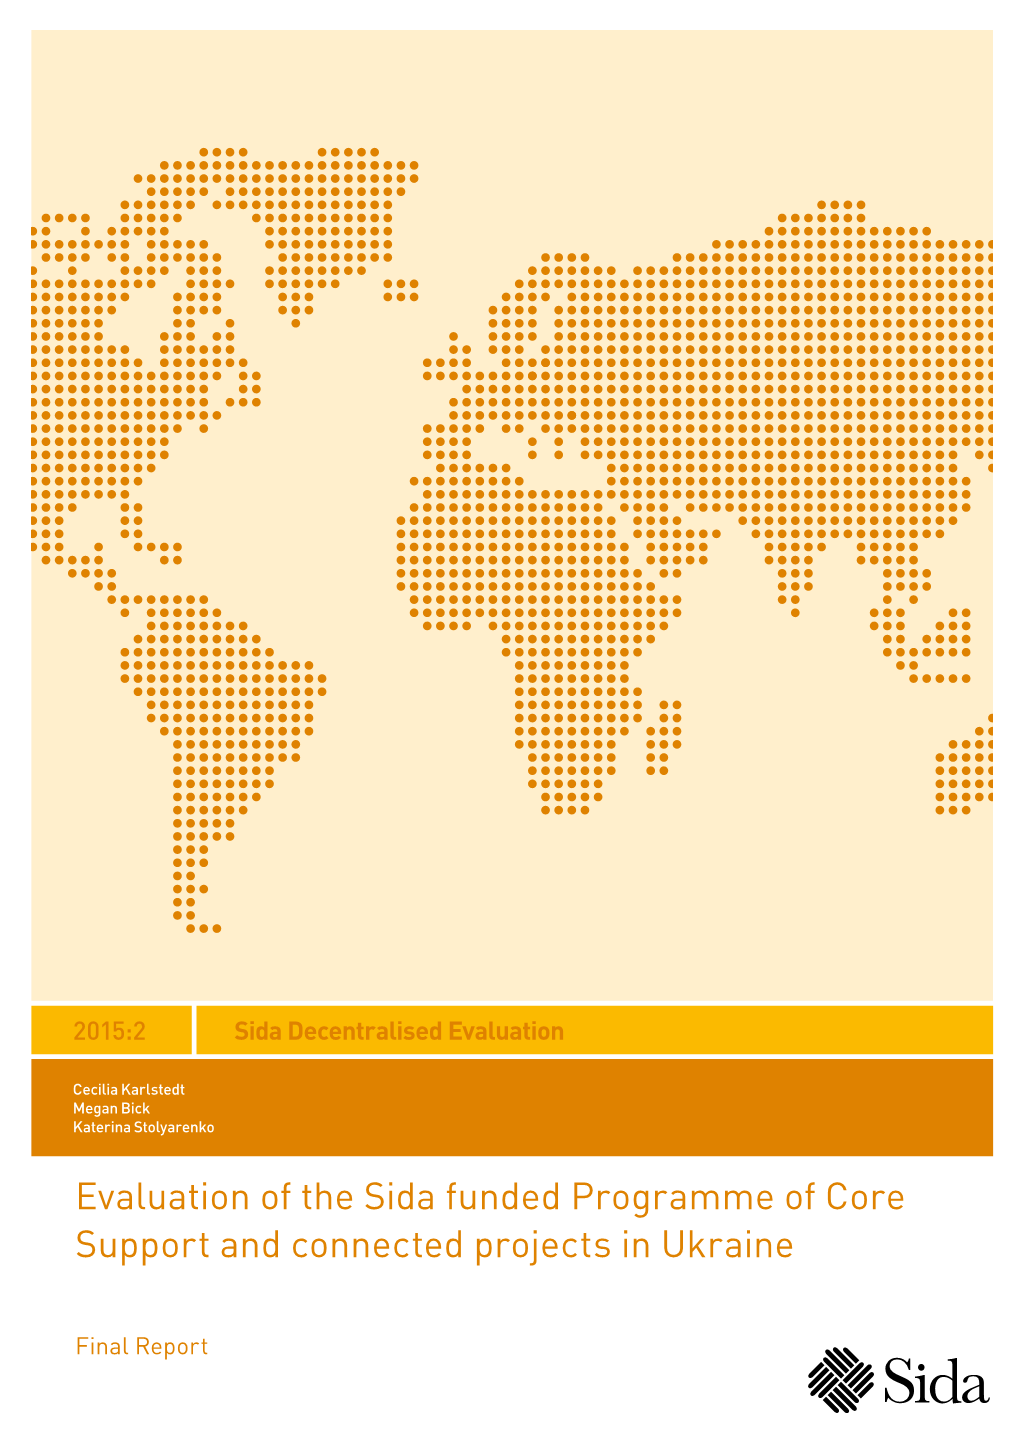 Evaluation of the Sida Funded Programme of Core Support and Connected Projects in Ukraine